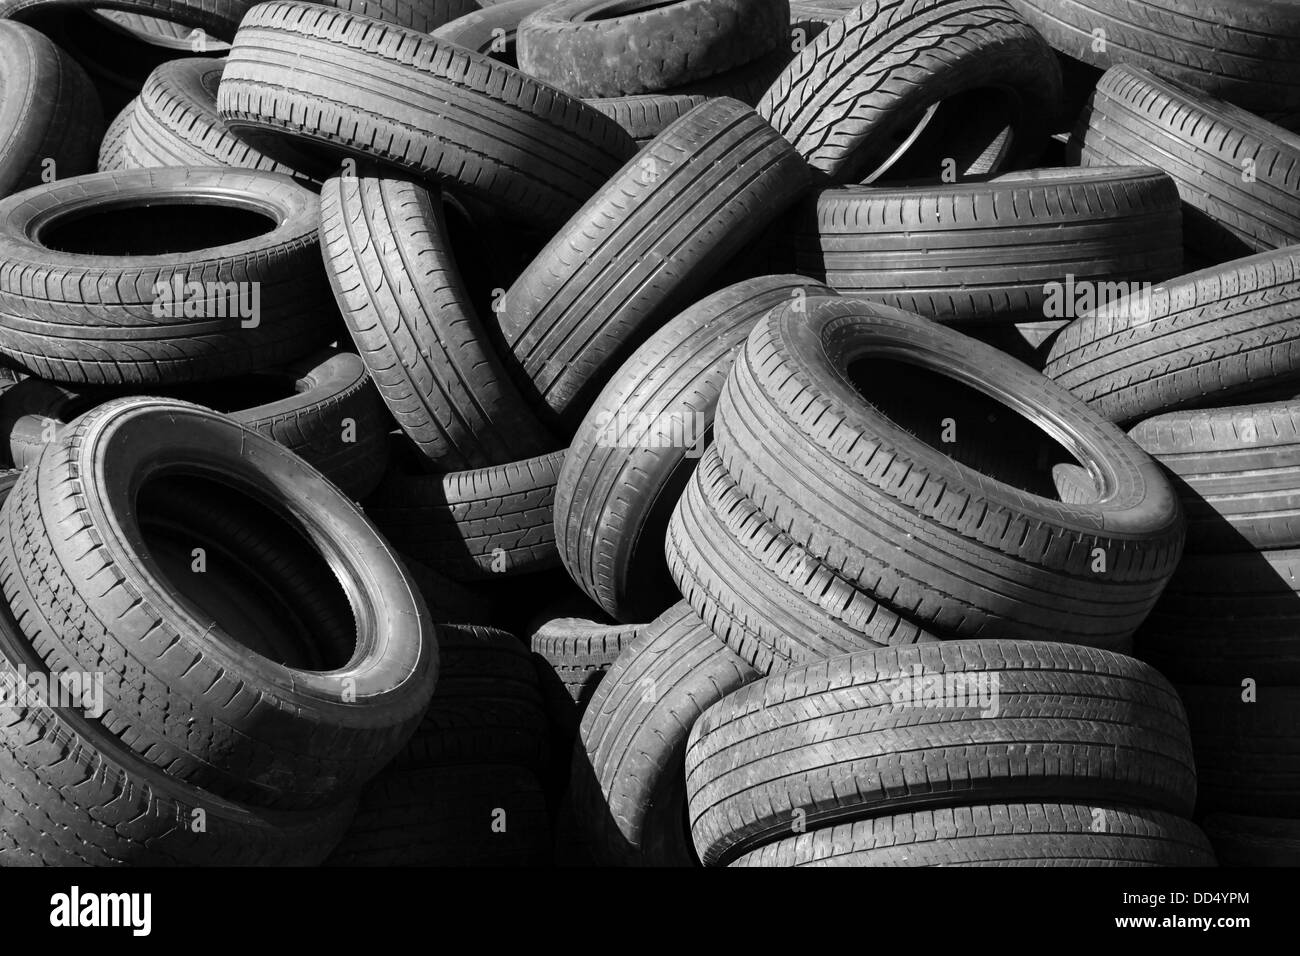 Pile of old used automotive tires Stock Photo